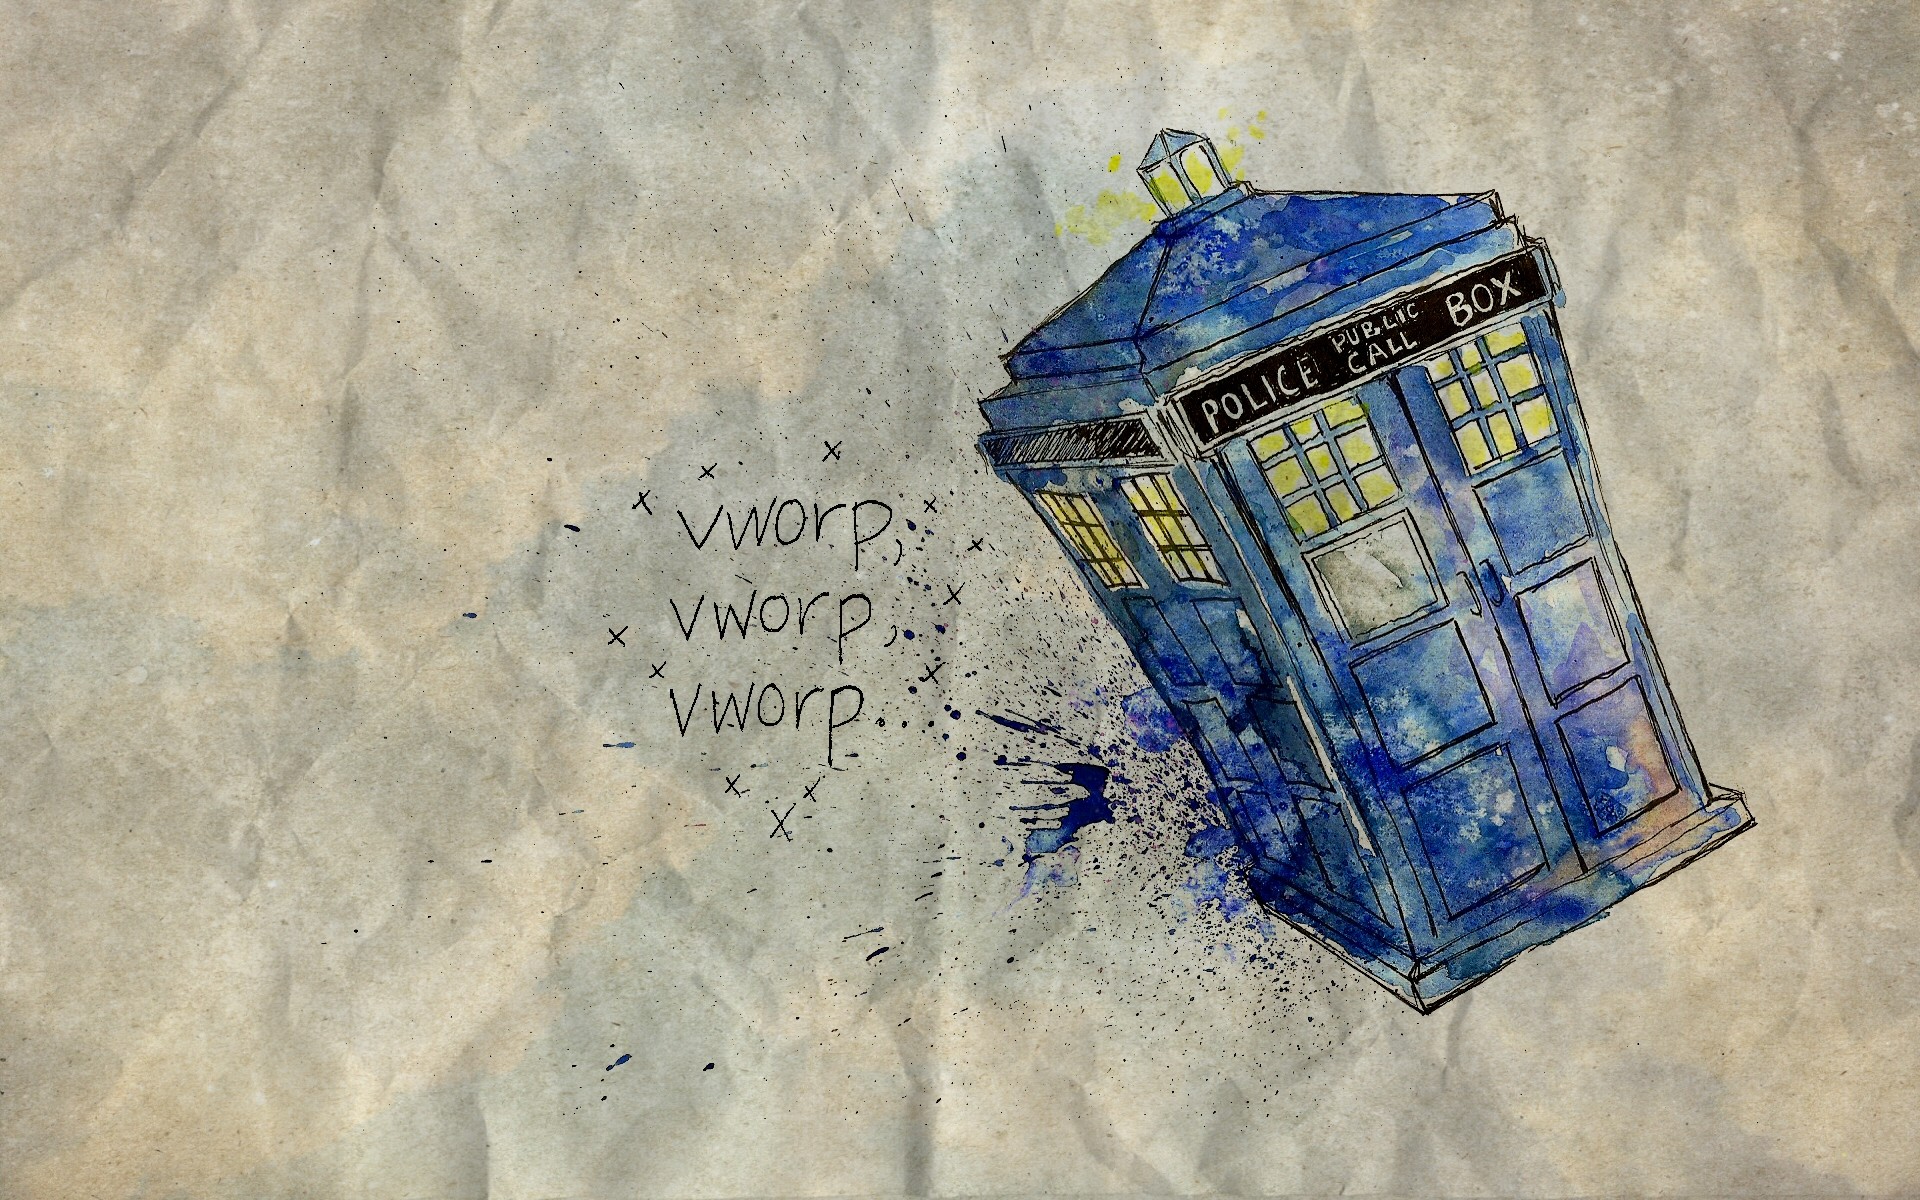 Doctor Who Wallpapers ââ¢â